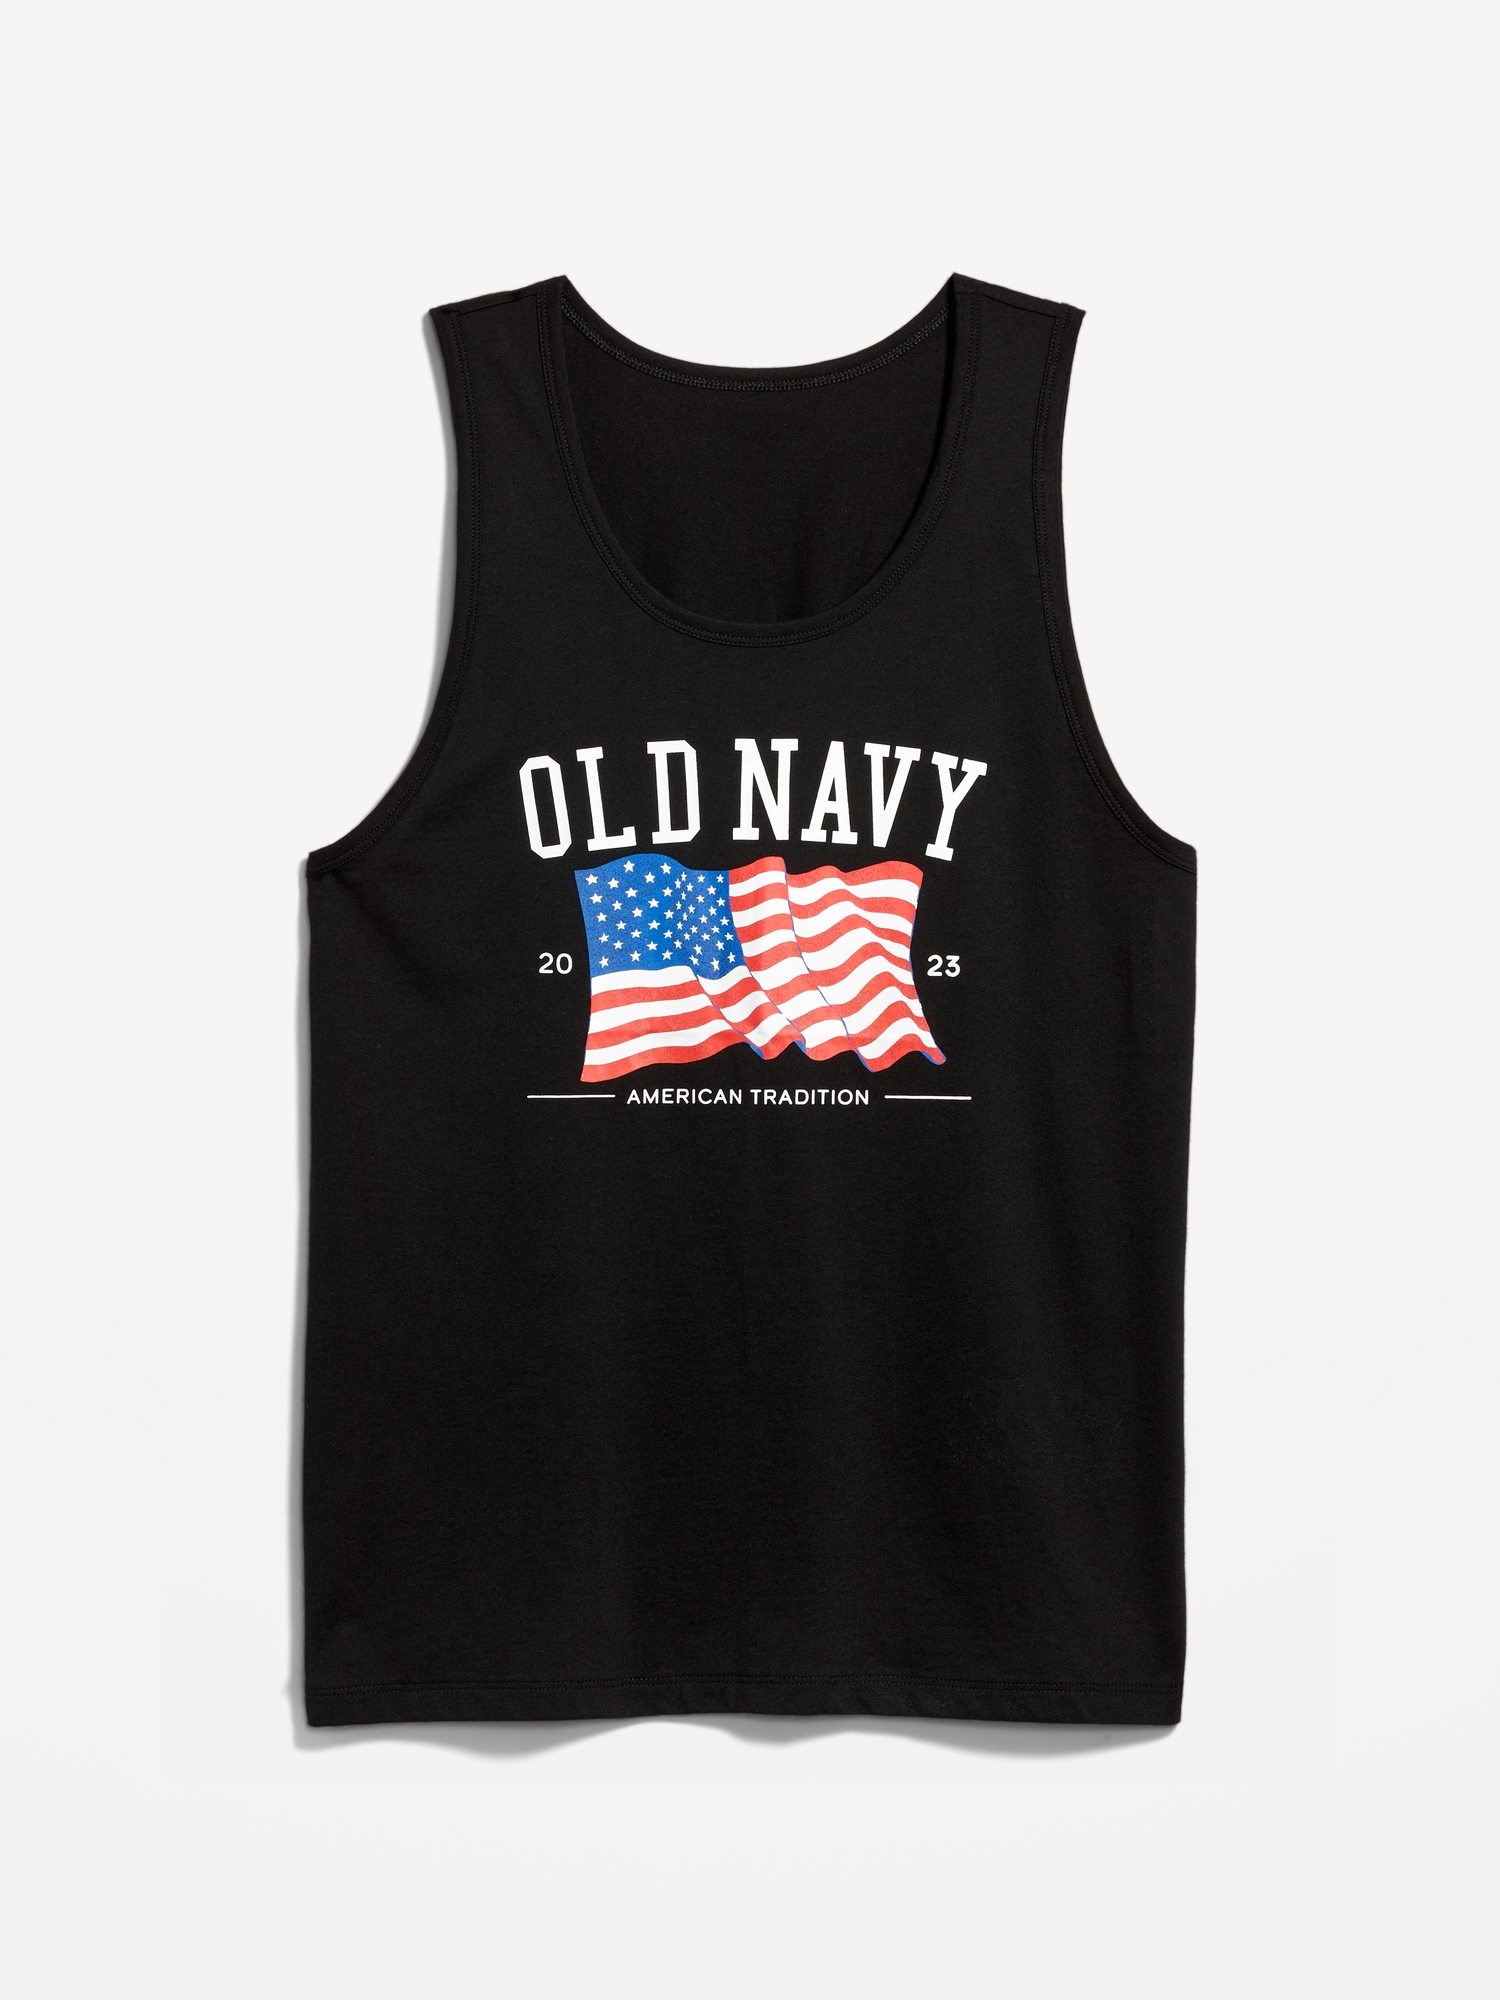 Matching "Old Navy" Flag Graphic Tank Top for Men Old Navy